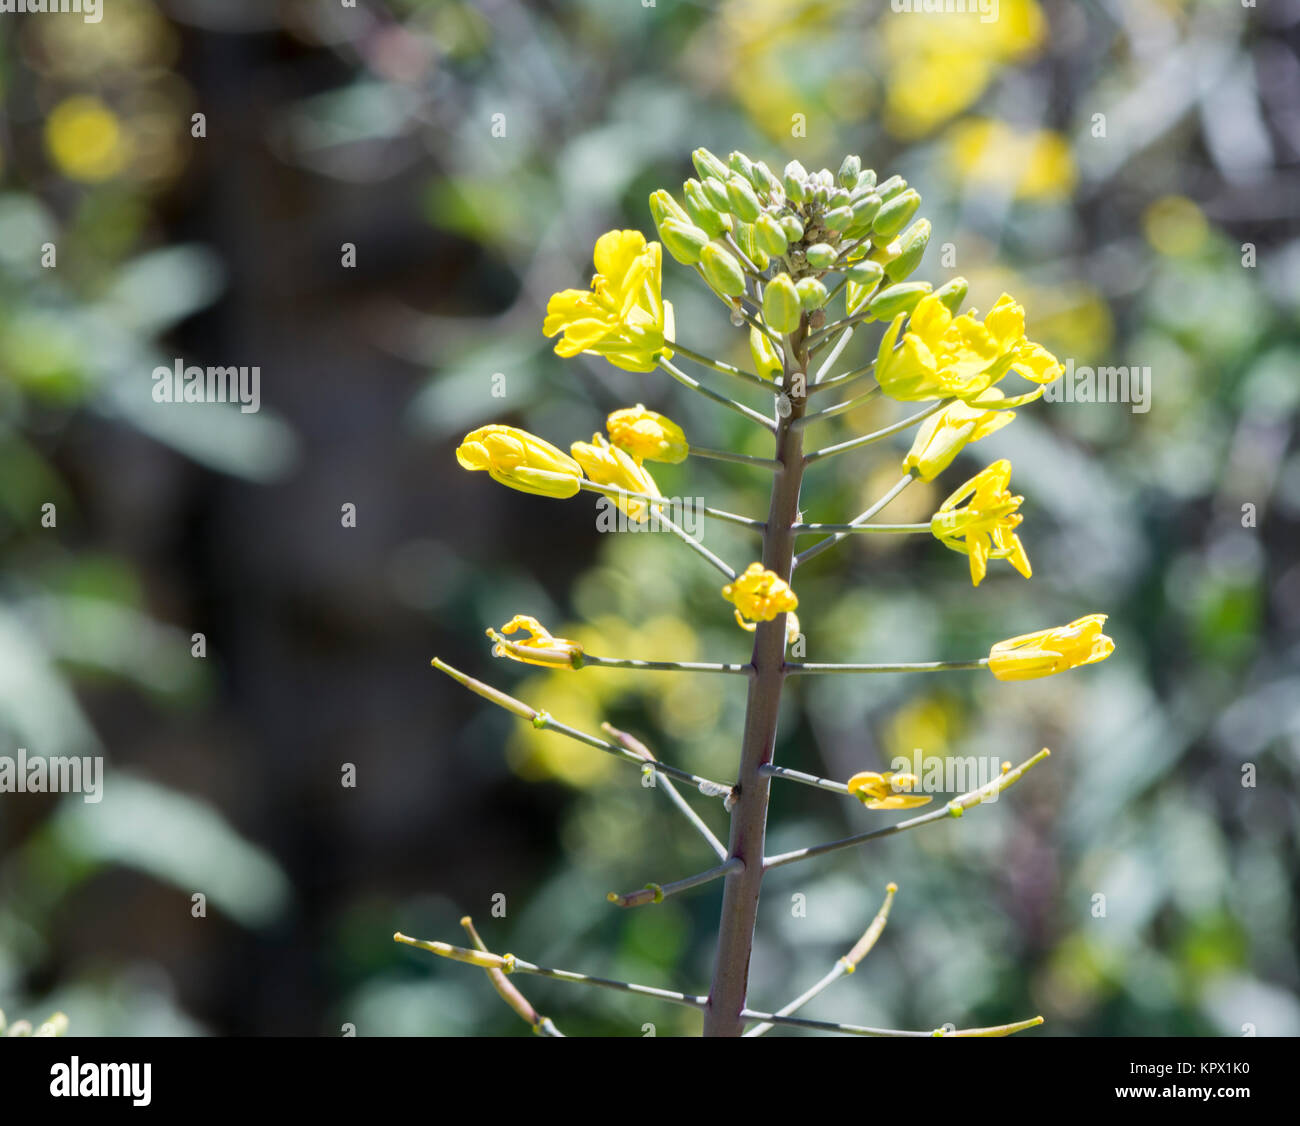 Close up view of a canola plant and flowers. Stock Photo